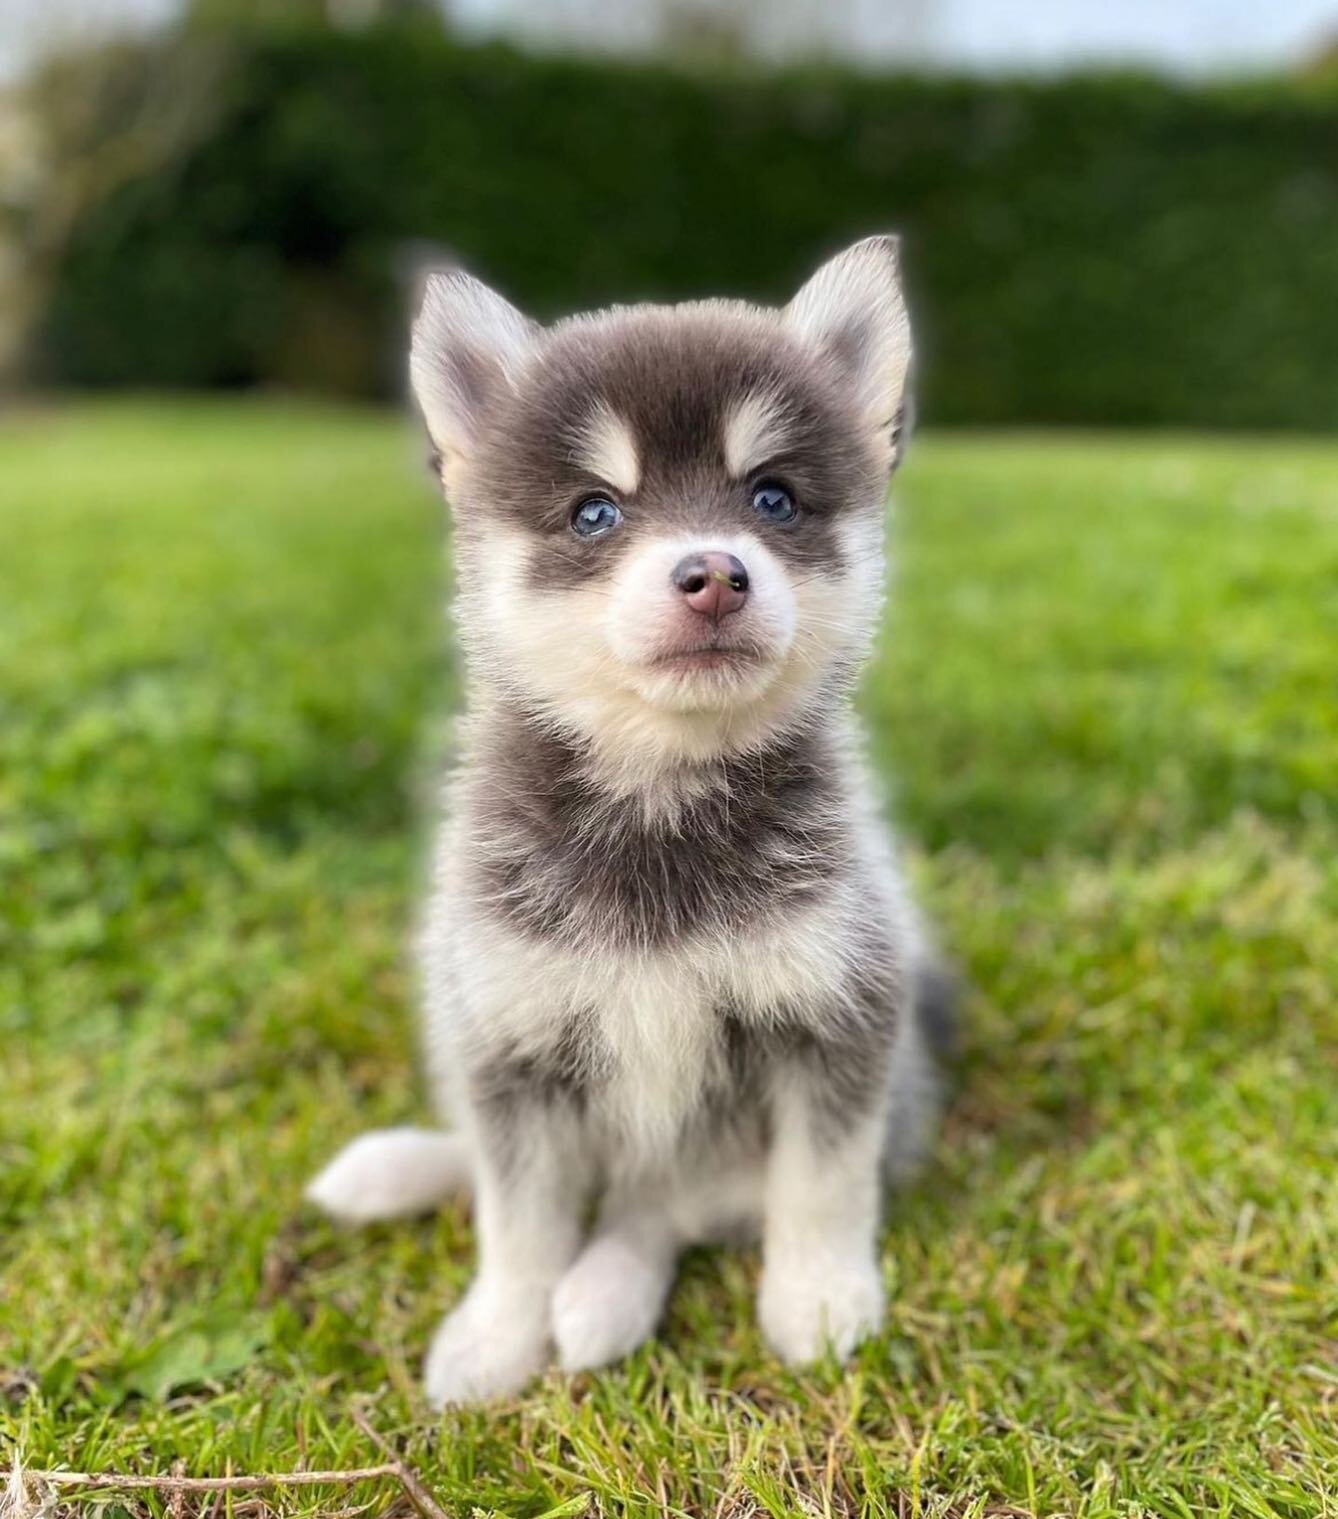 Everyone meet Tofu! 🥺 He&rsquo;s a Pomsky (Pomeranian x Husky) and we've just released tickets for a class with him and his siblings this Sunday! 🎉🐶

Tickets are now on sale at: www.pawpalyoga.co.uk/book-tickets-1